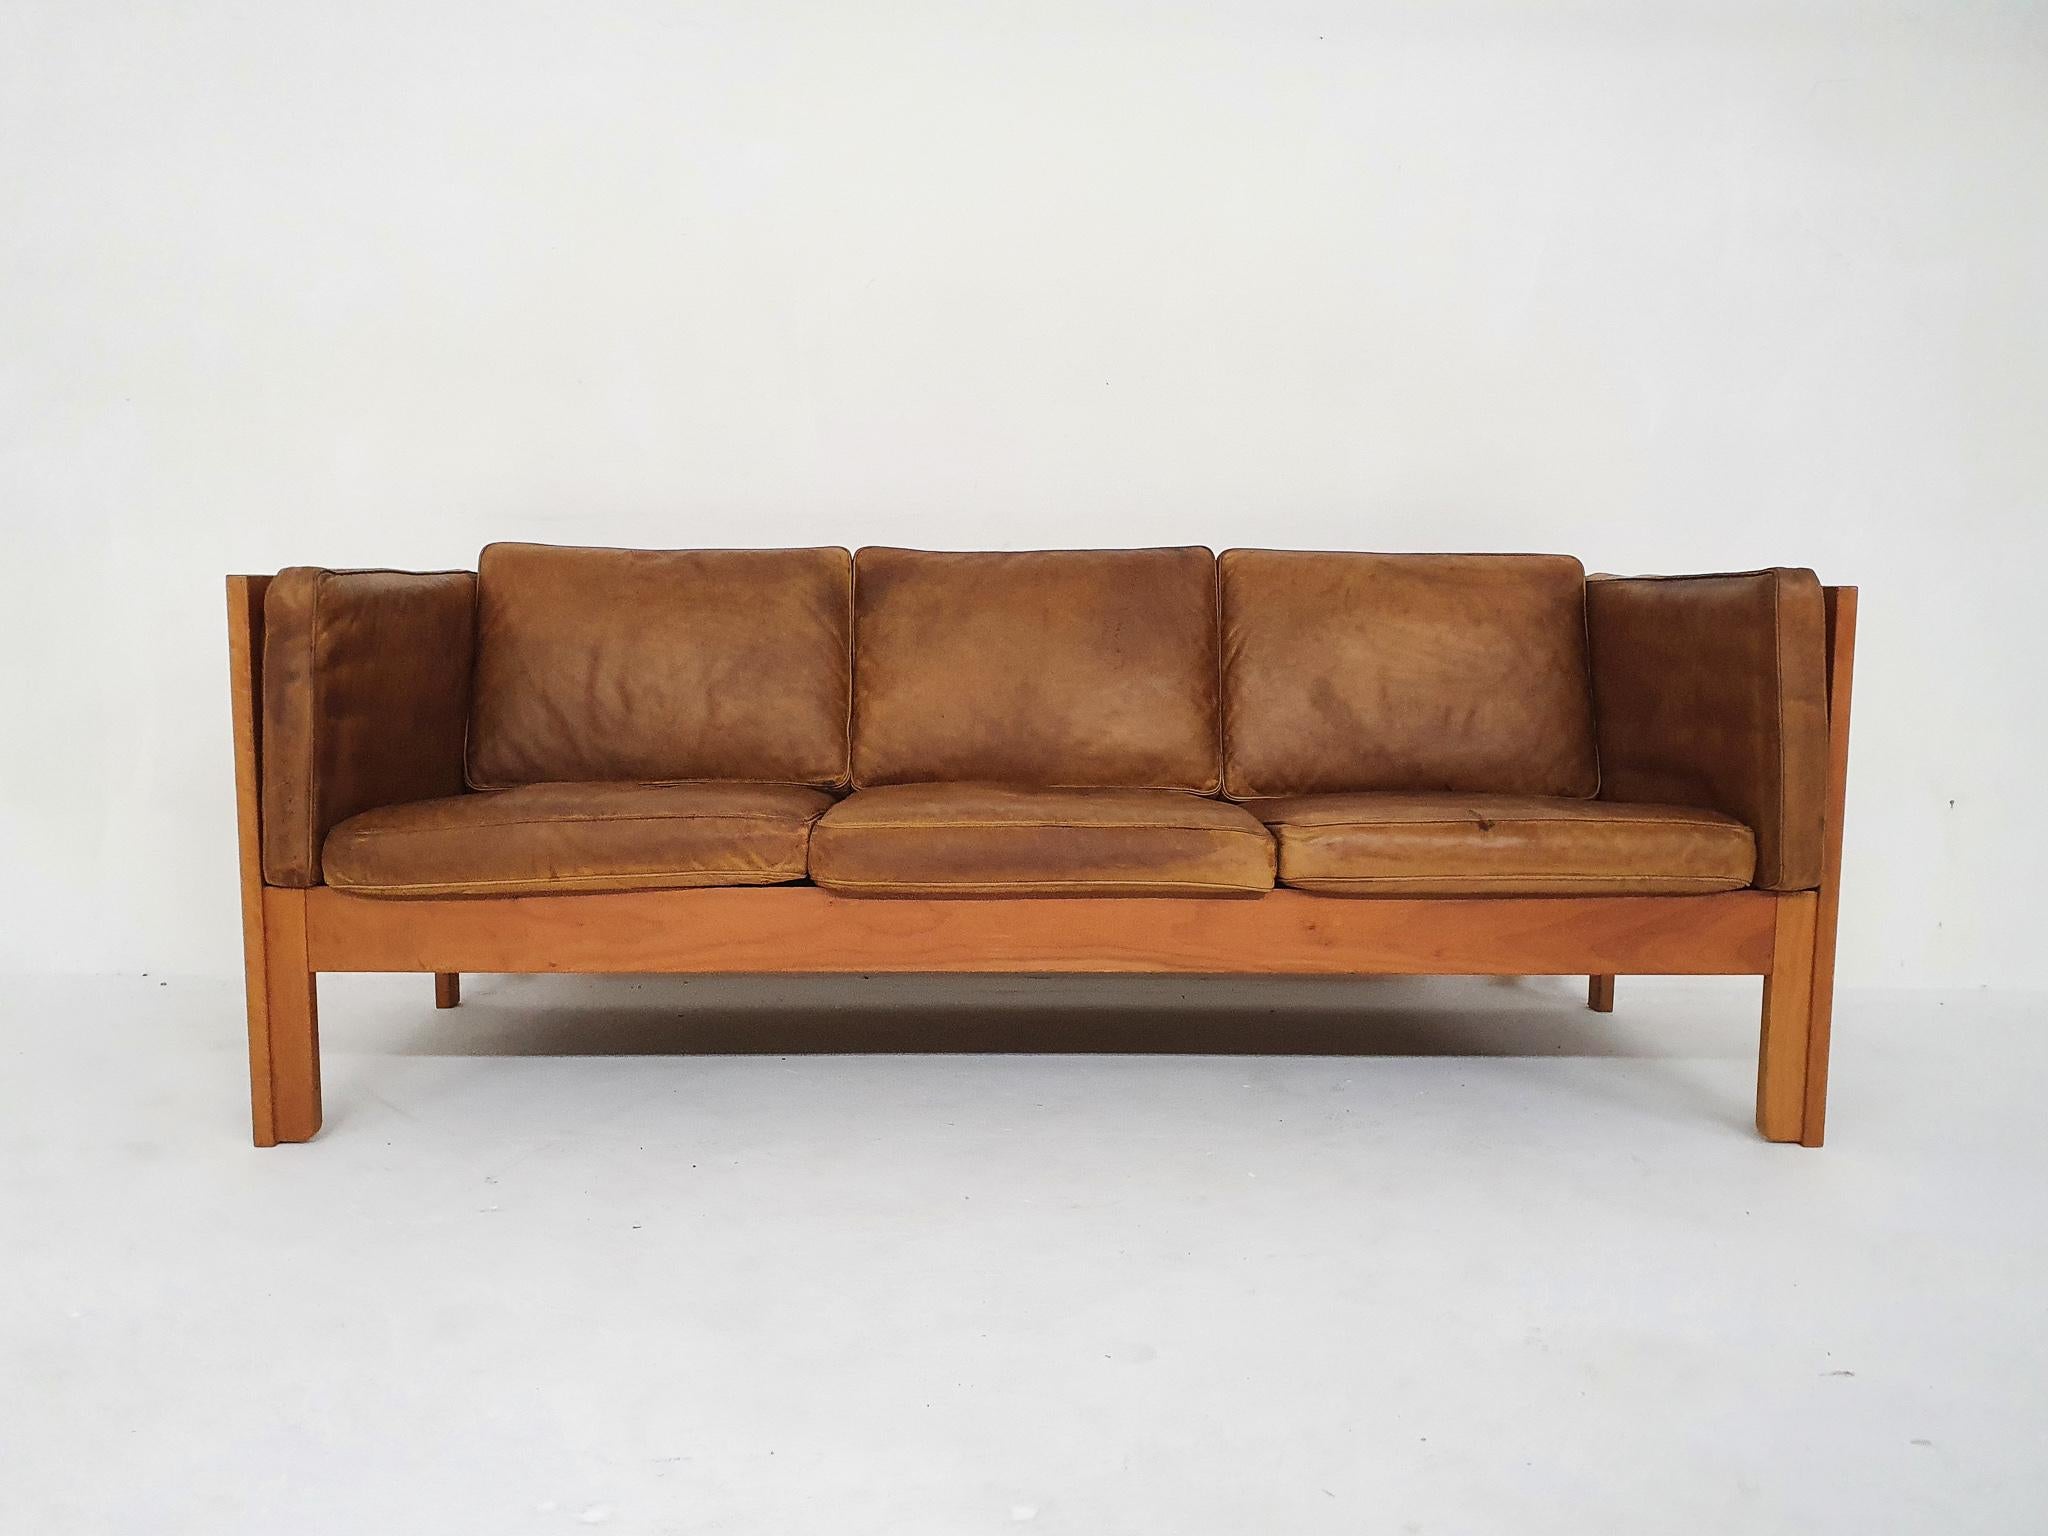 Wooden sofa with cognac leather cushions. Designed by Borge Mogensen for Fredericia.
The leather has some stains and the arm rest cushion has cat scratches. The wooden frame is in good condition, only a sratch on the back.
The sofa is marked